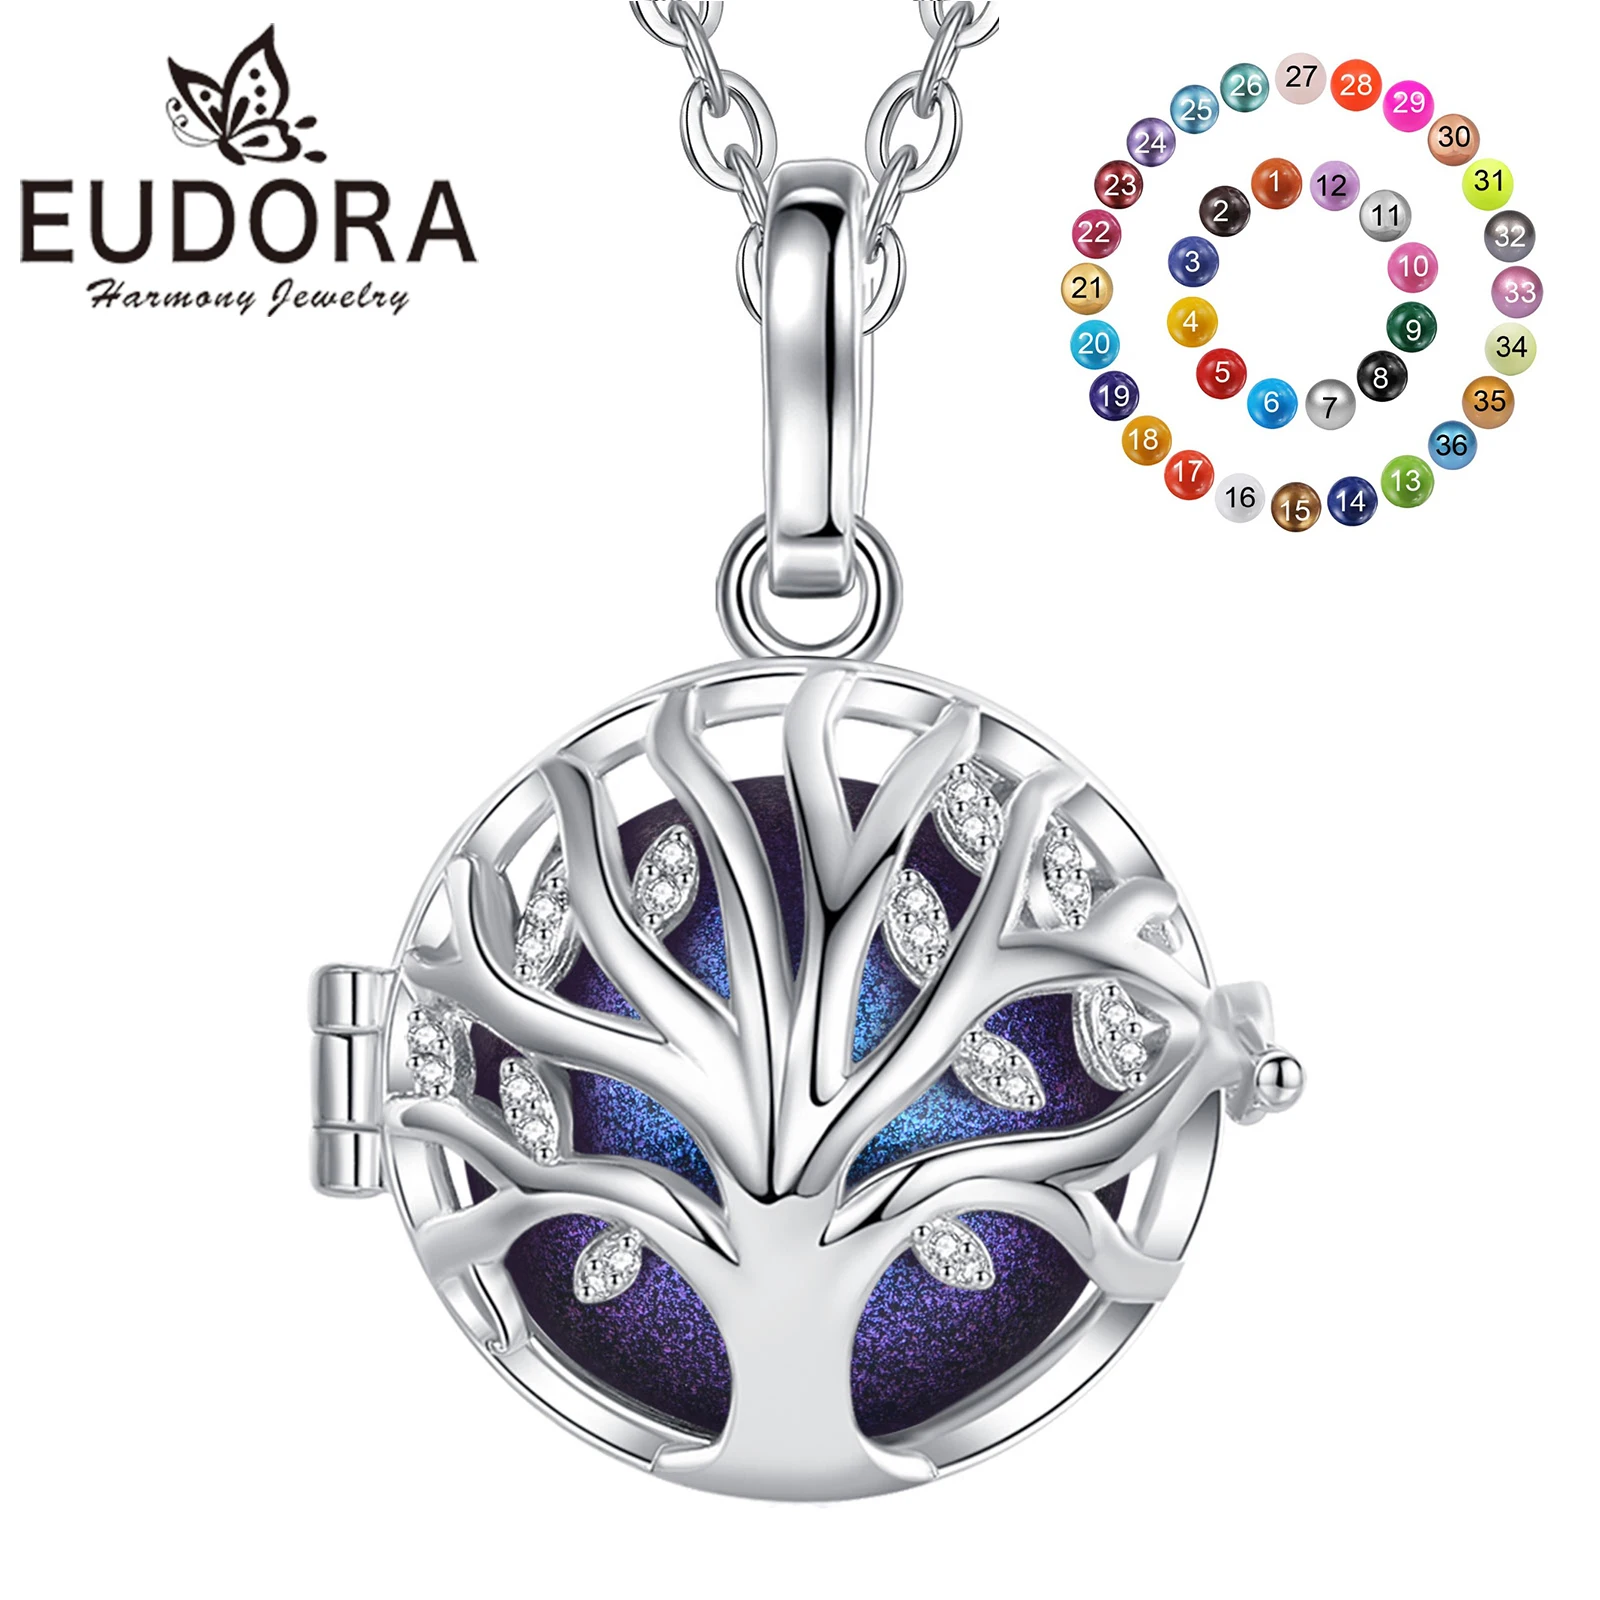 

Eudora 18mm Fashion Crystal Tree Cage Harmony Ball Chime Bell Pendant Angel Caller Bola Necklace for Baby Pregnancy Jewelry Gift